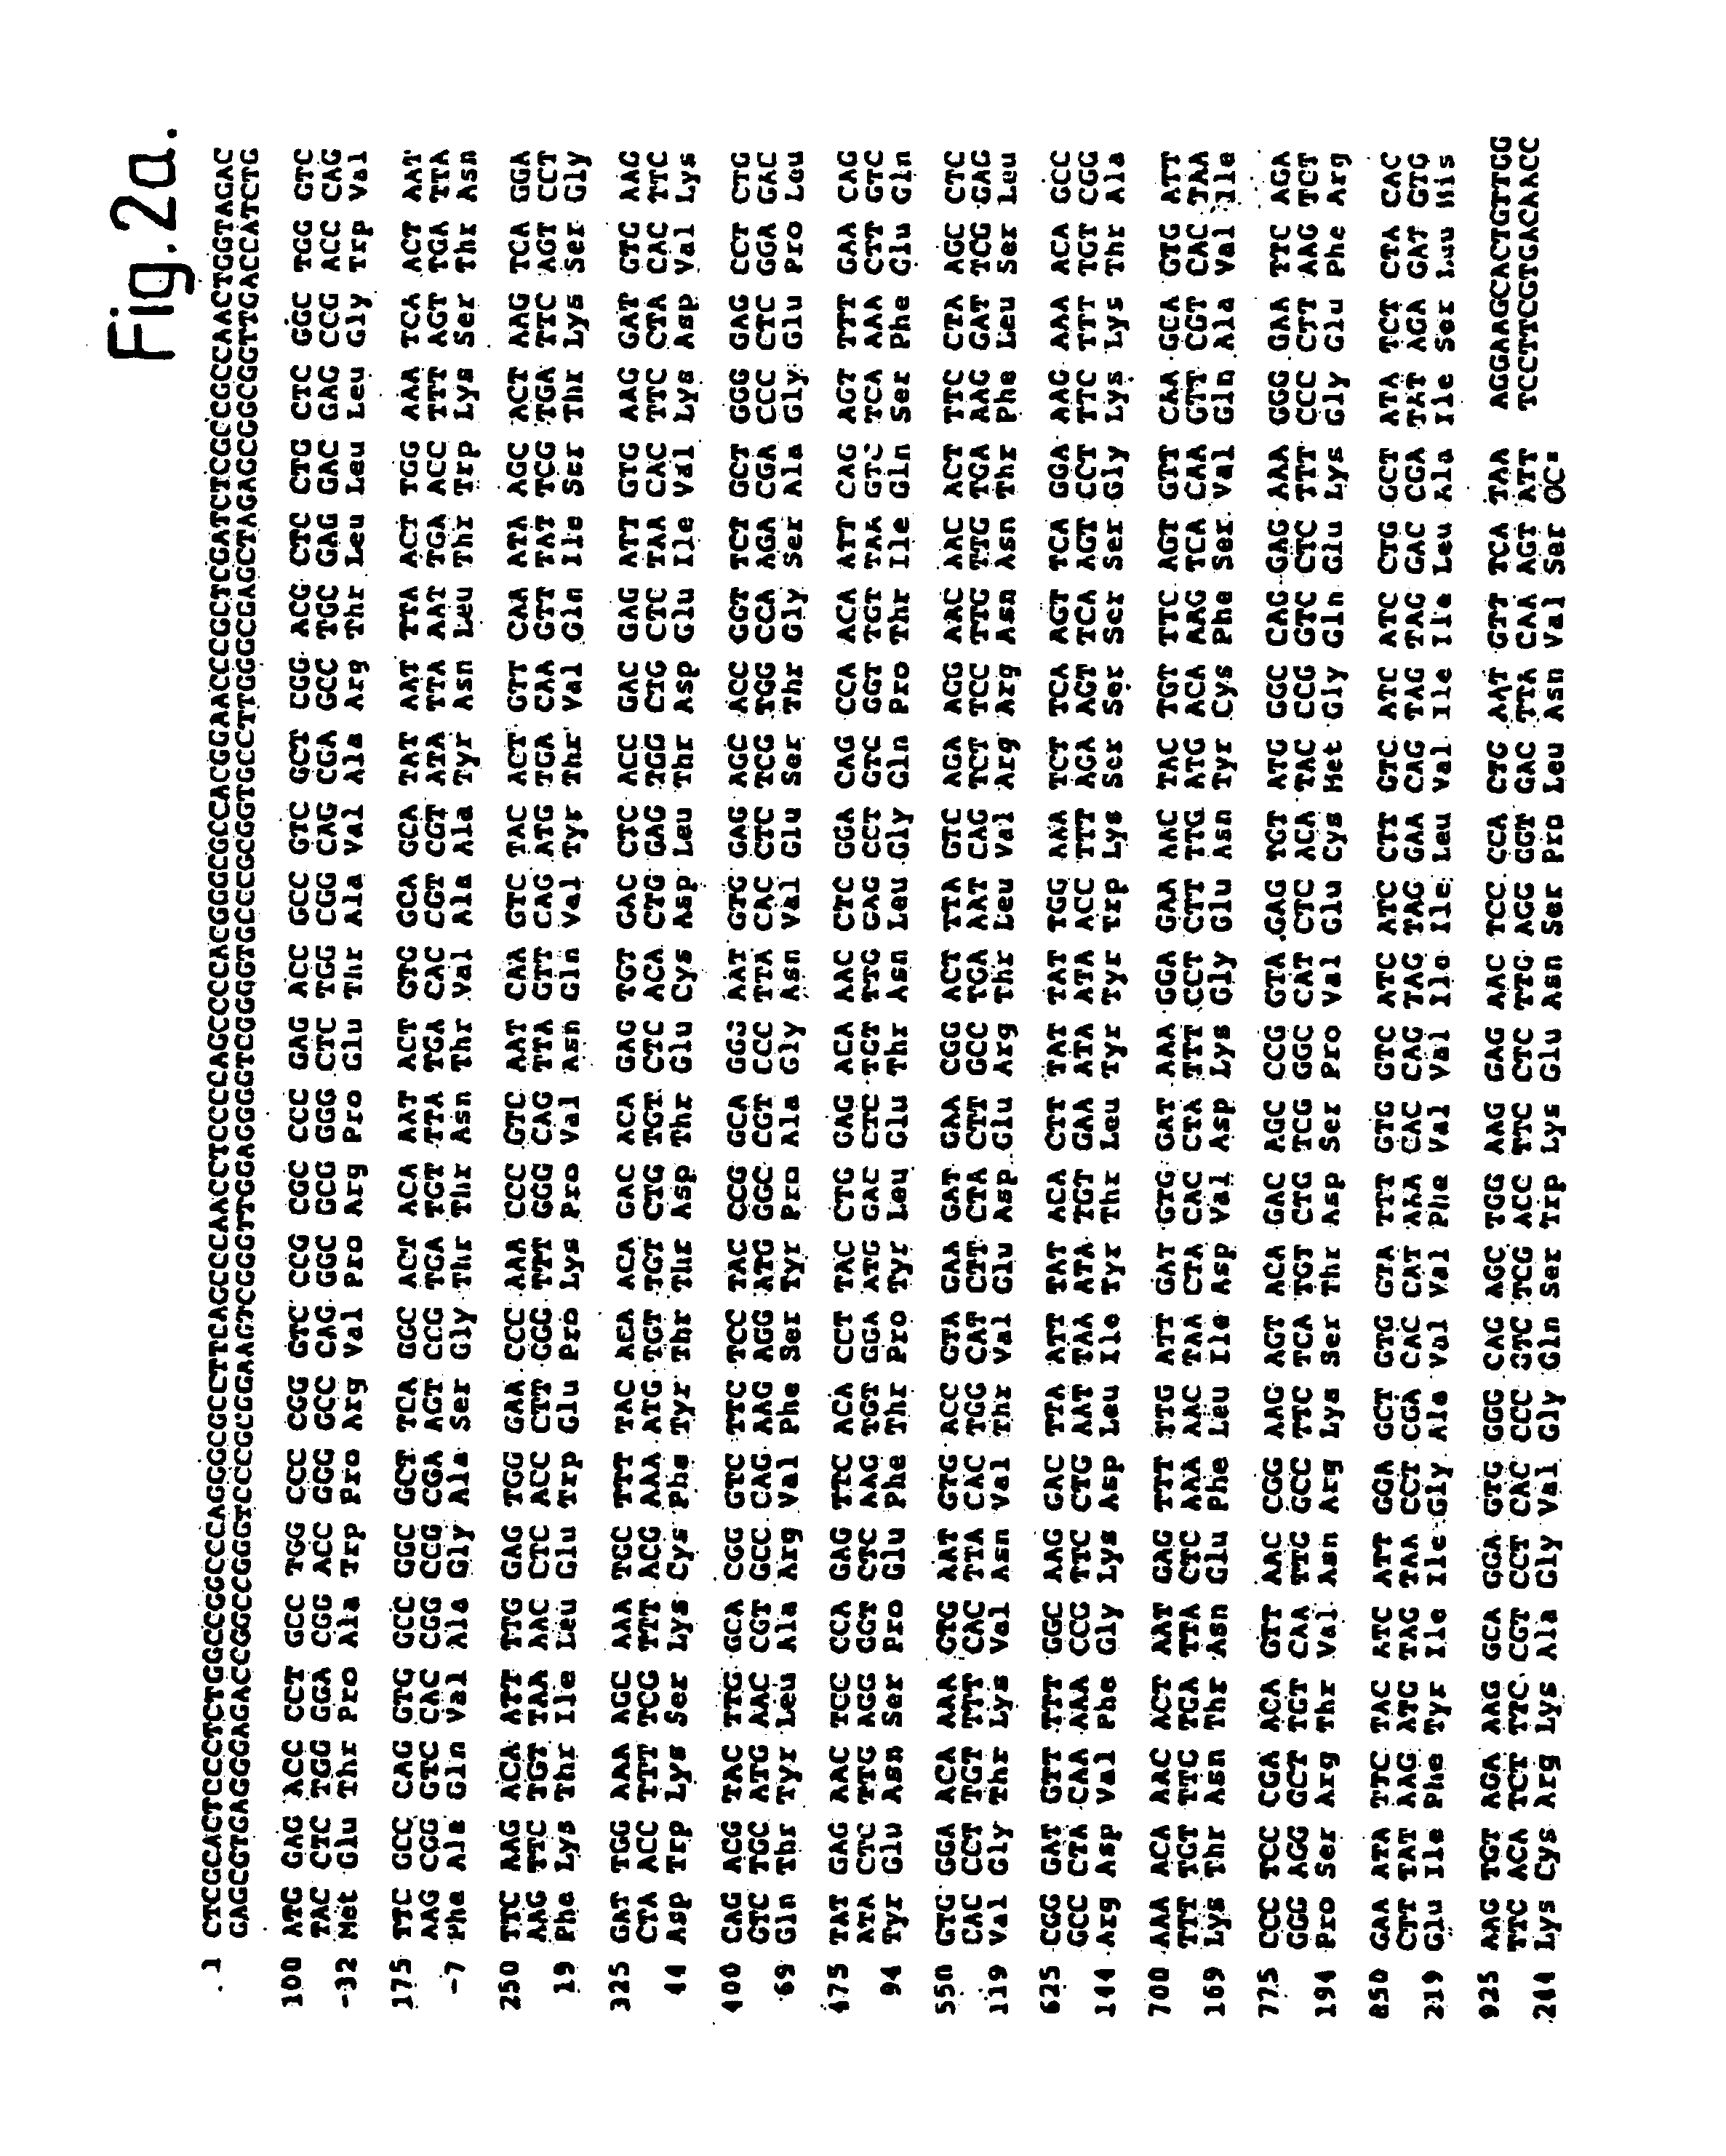 Methods and deoxyribonucleic acid for the preparation of tissue factor protein